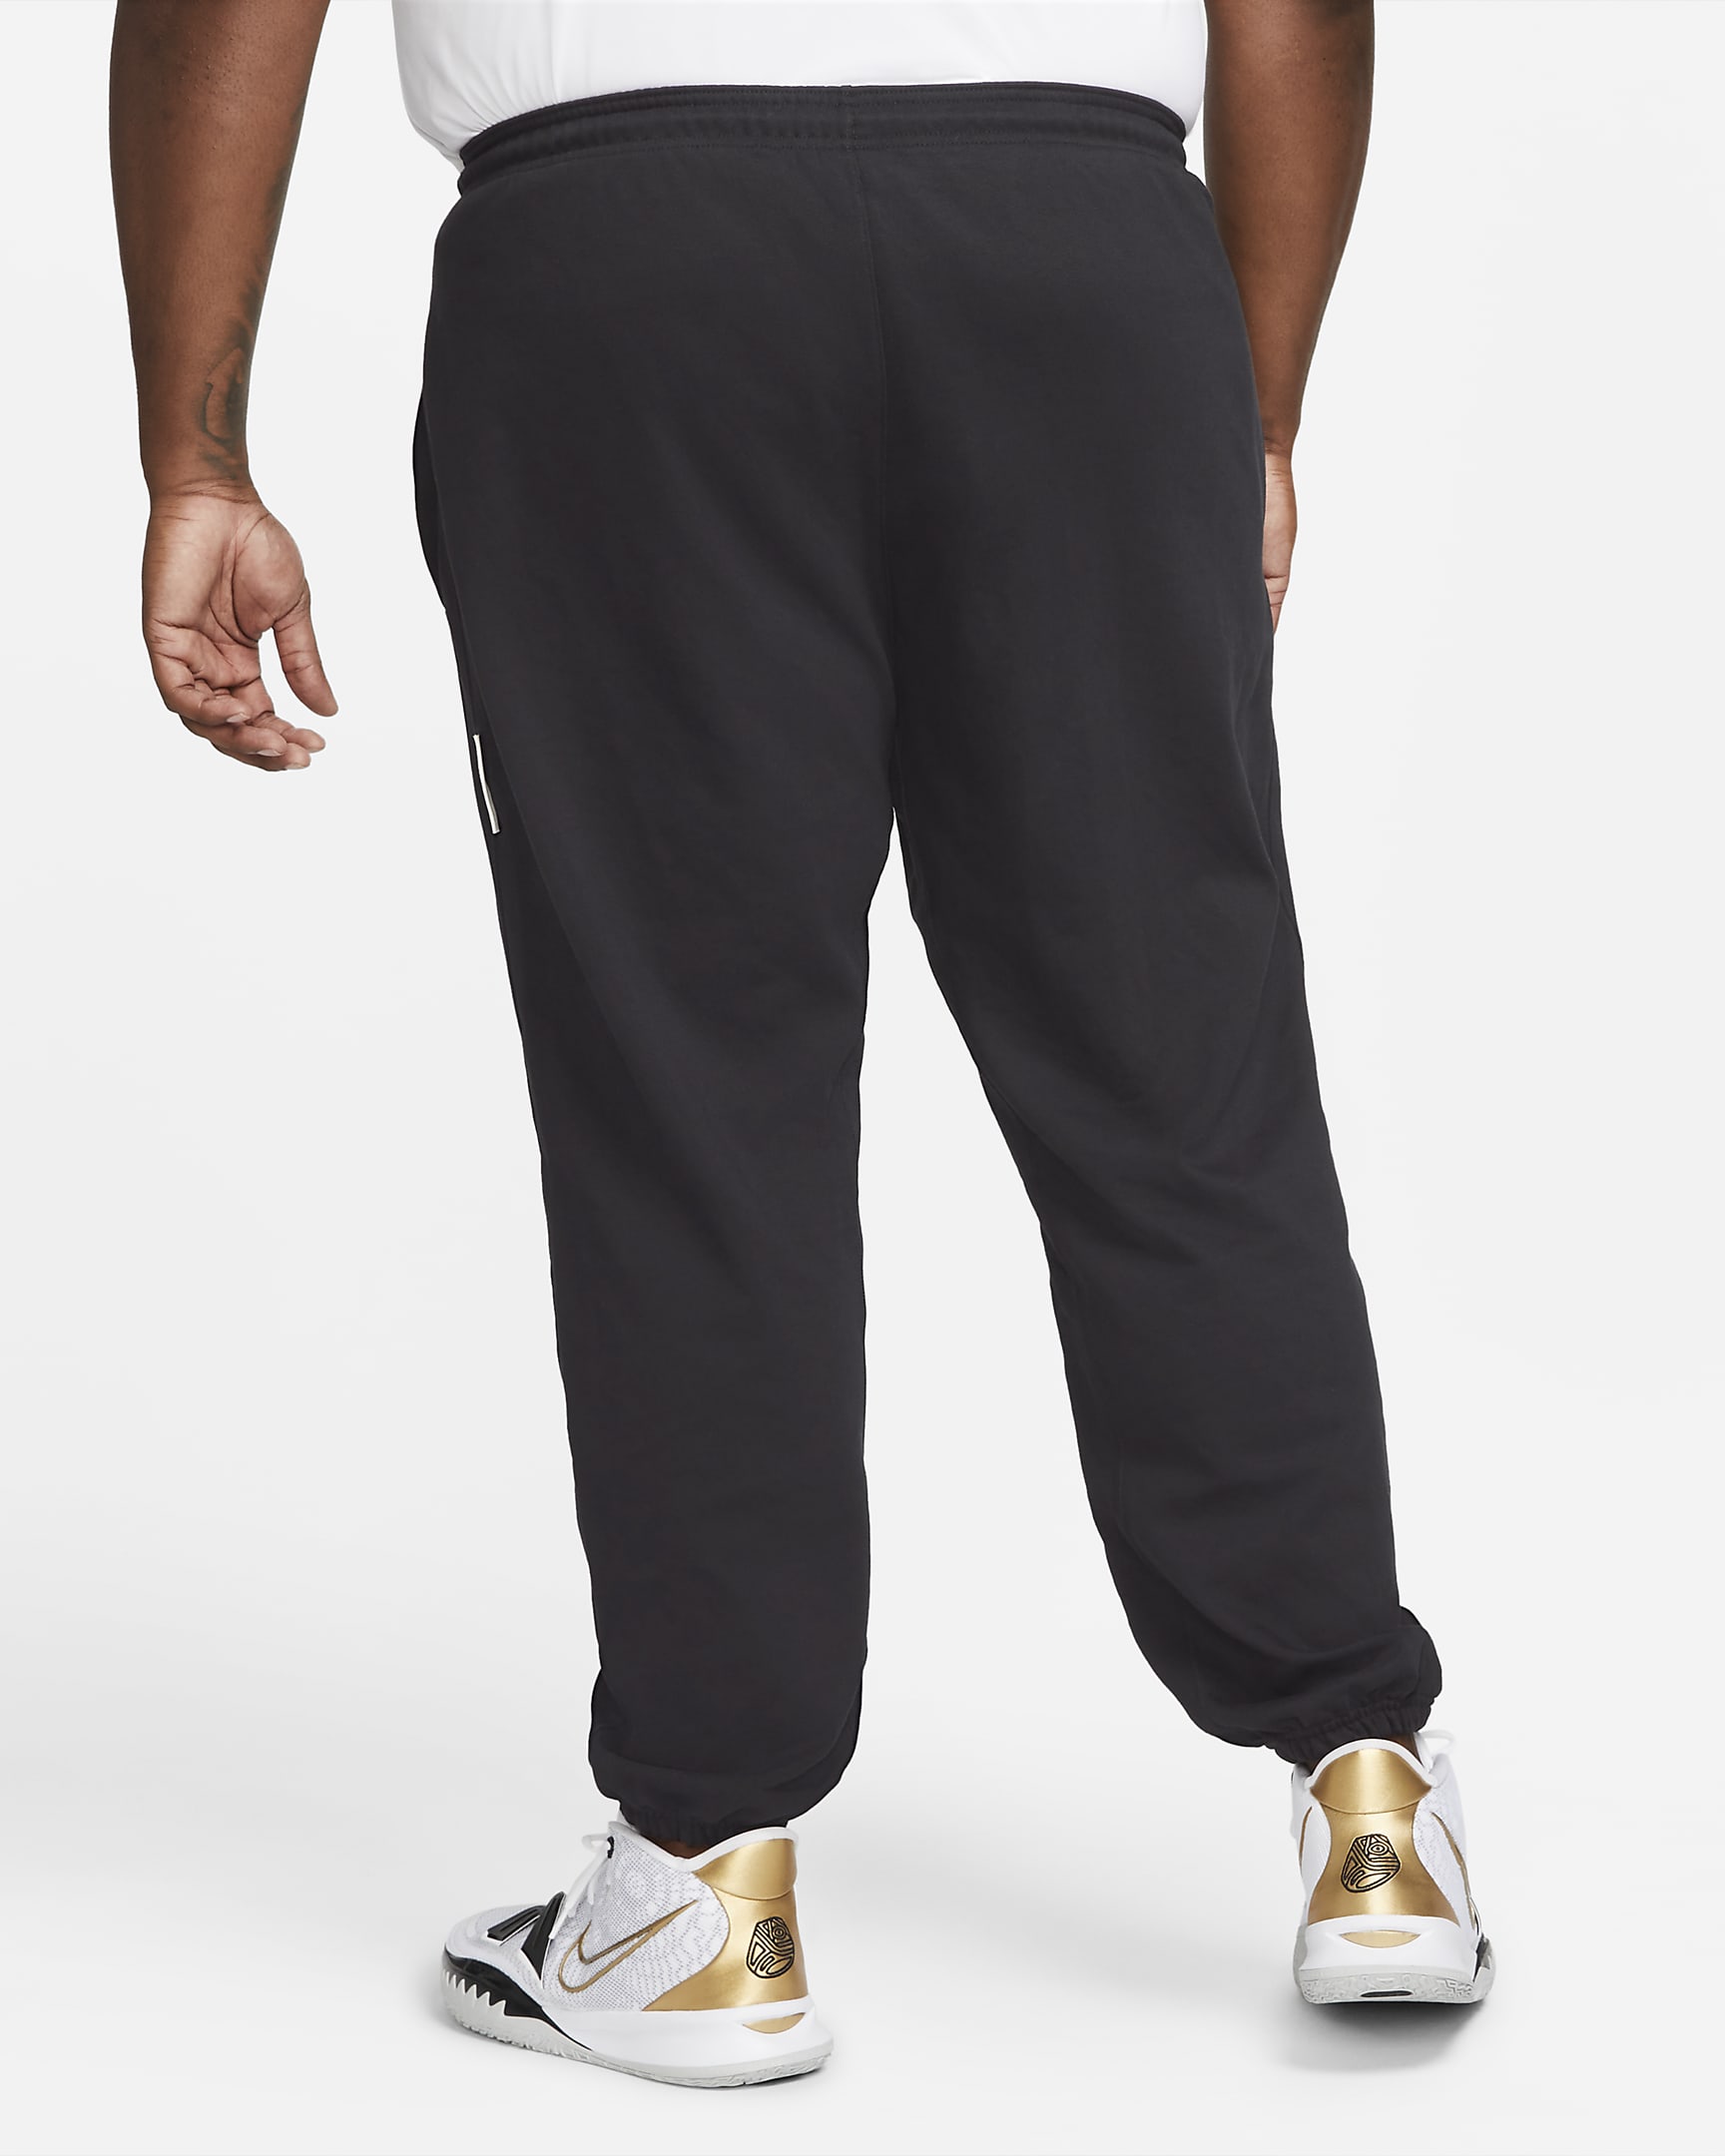 Nike Standard Issue Men's Dri-FIT Basketball Trousers - Black/Pale Ivory